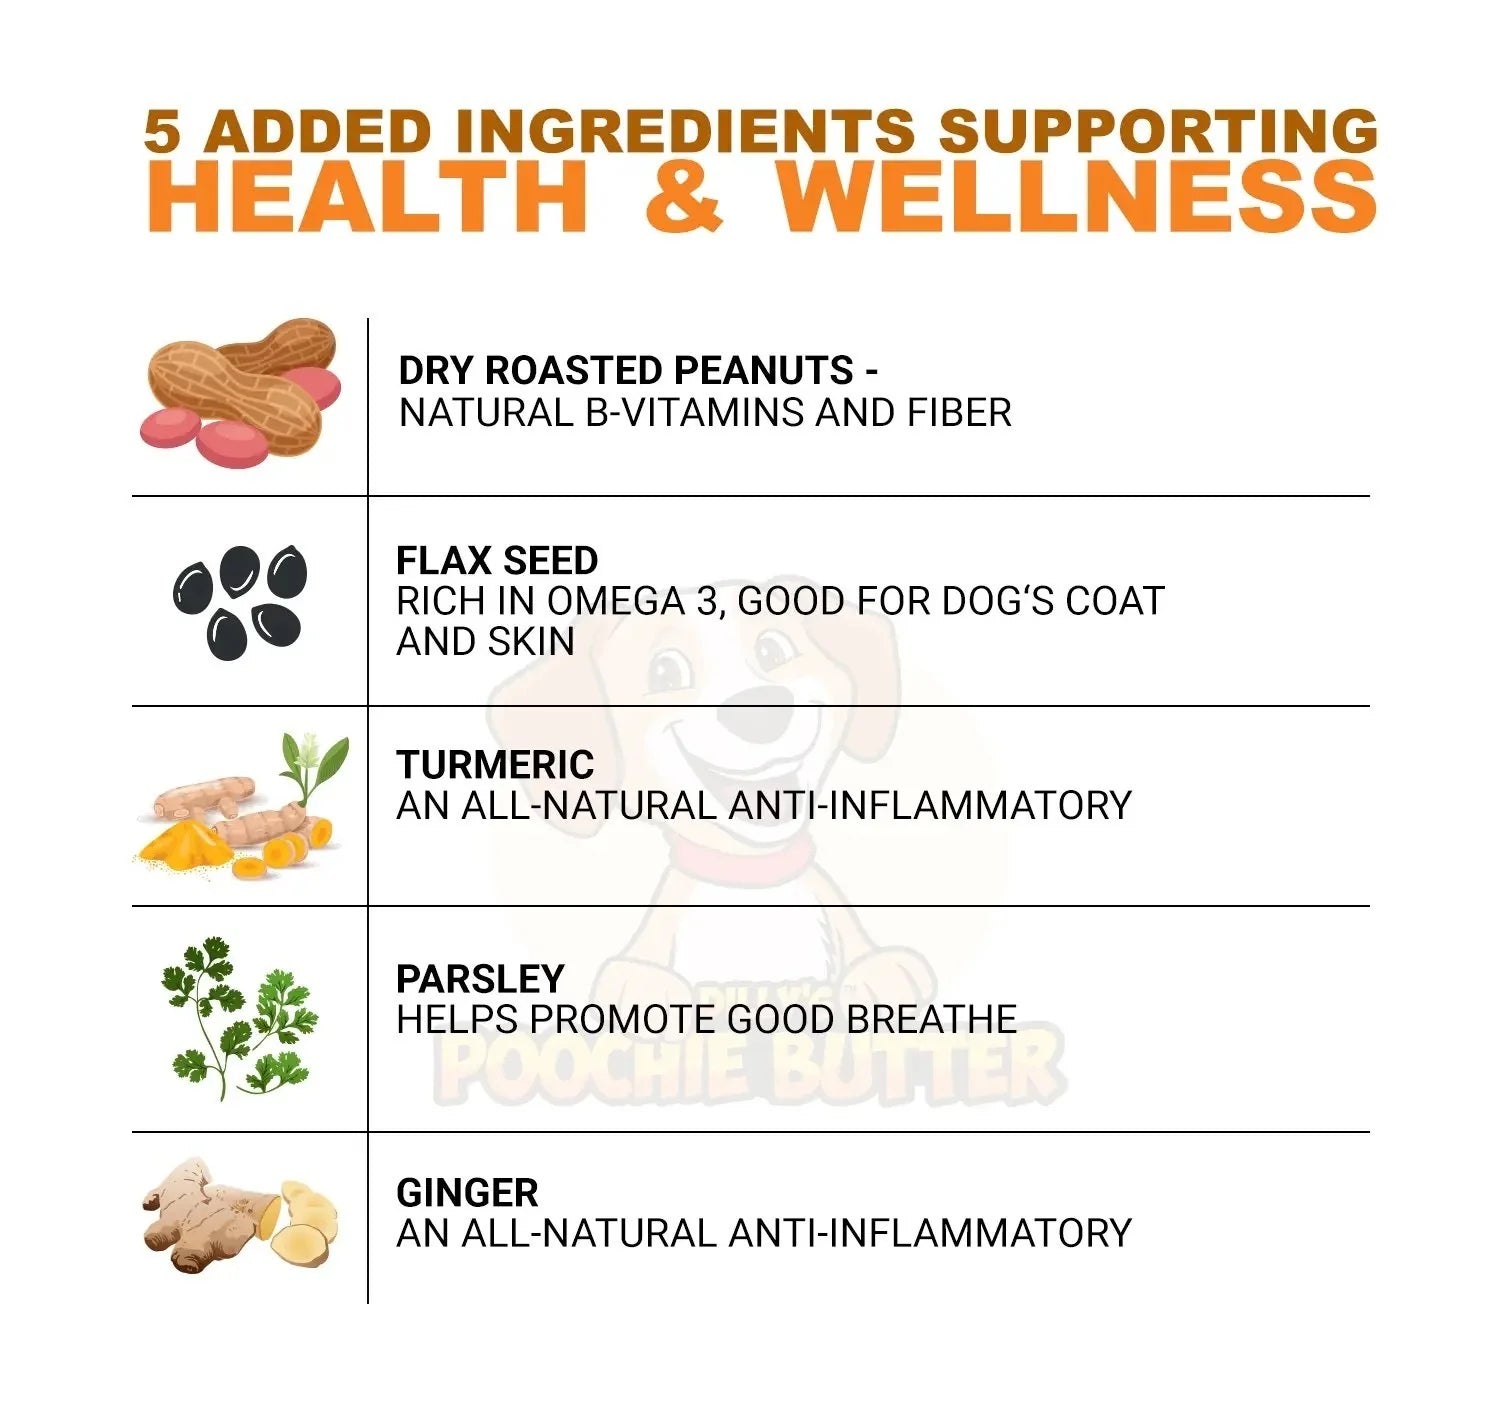 Image of the 5 added ingredients used to make the peanut butter which support health & wellness. Manufacturer states, ingredients & benefits are: dry roasted peanuts which have natural B-vitamins and fiber. Flaxseed which is rich in omega 3, good for dog's coat and skin. Turmeric which is an all-natural anti-inflammatory. Parsley which helps promote good breath. Ginger which is also an all-natural anti-inflammatory.